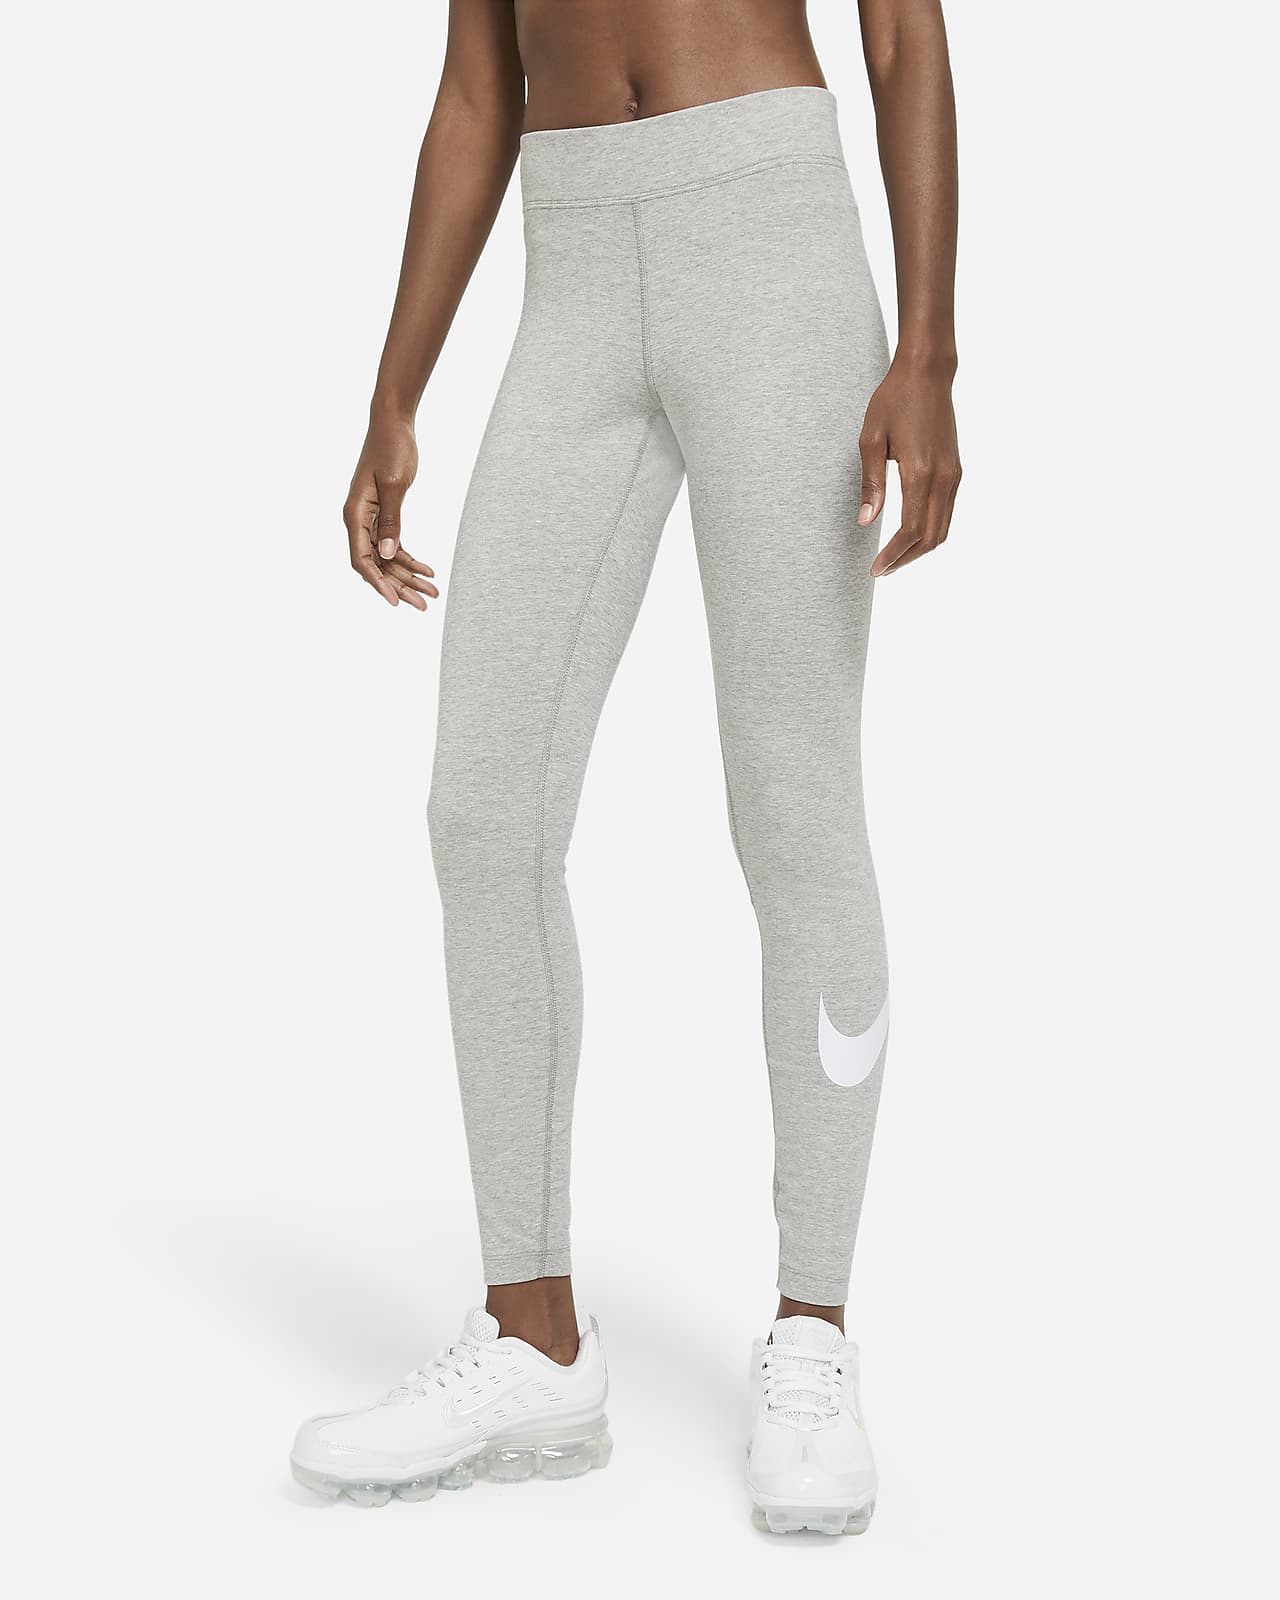 https://static.nike.com/a/images/t_PDP_1280_v1/f_auto,q_auto:eco/79fdfde5-e4df-4752-ae0b-68d1bcaaaccf/sportswear-essential-mid-rise-swoosh-leggings-XnjHdT.png